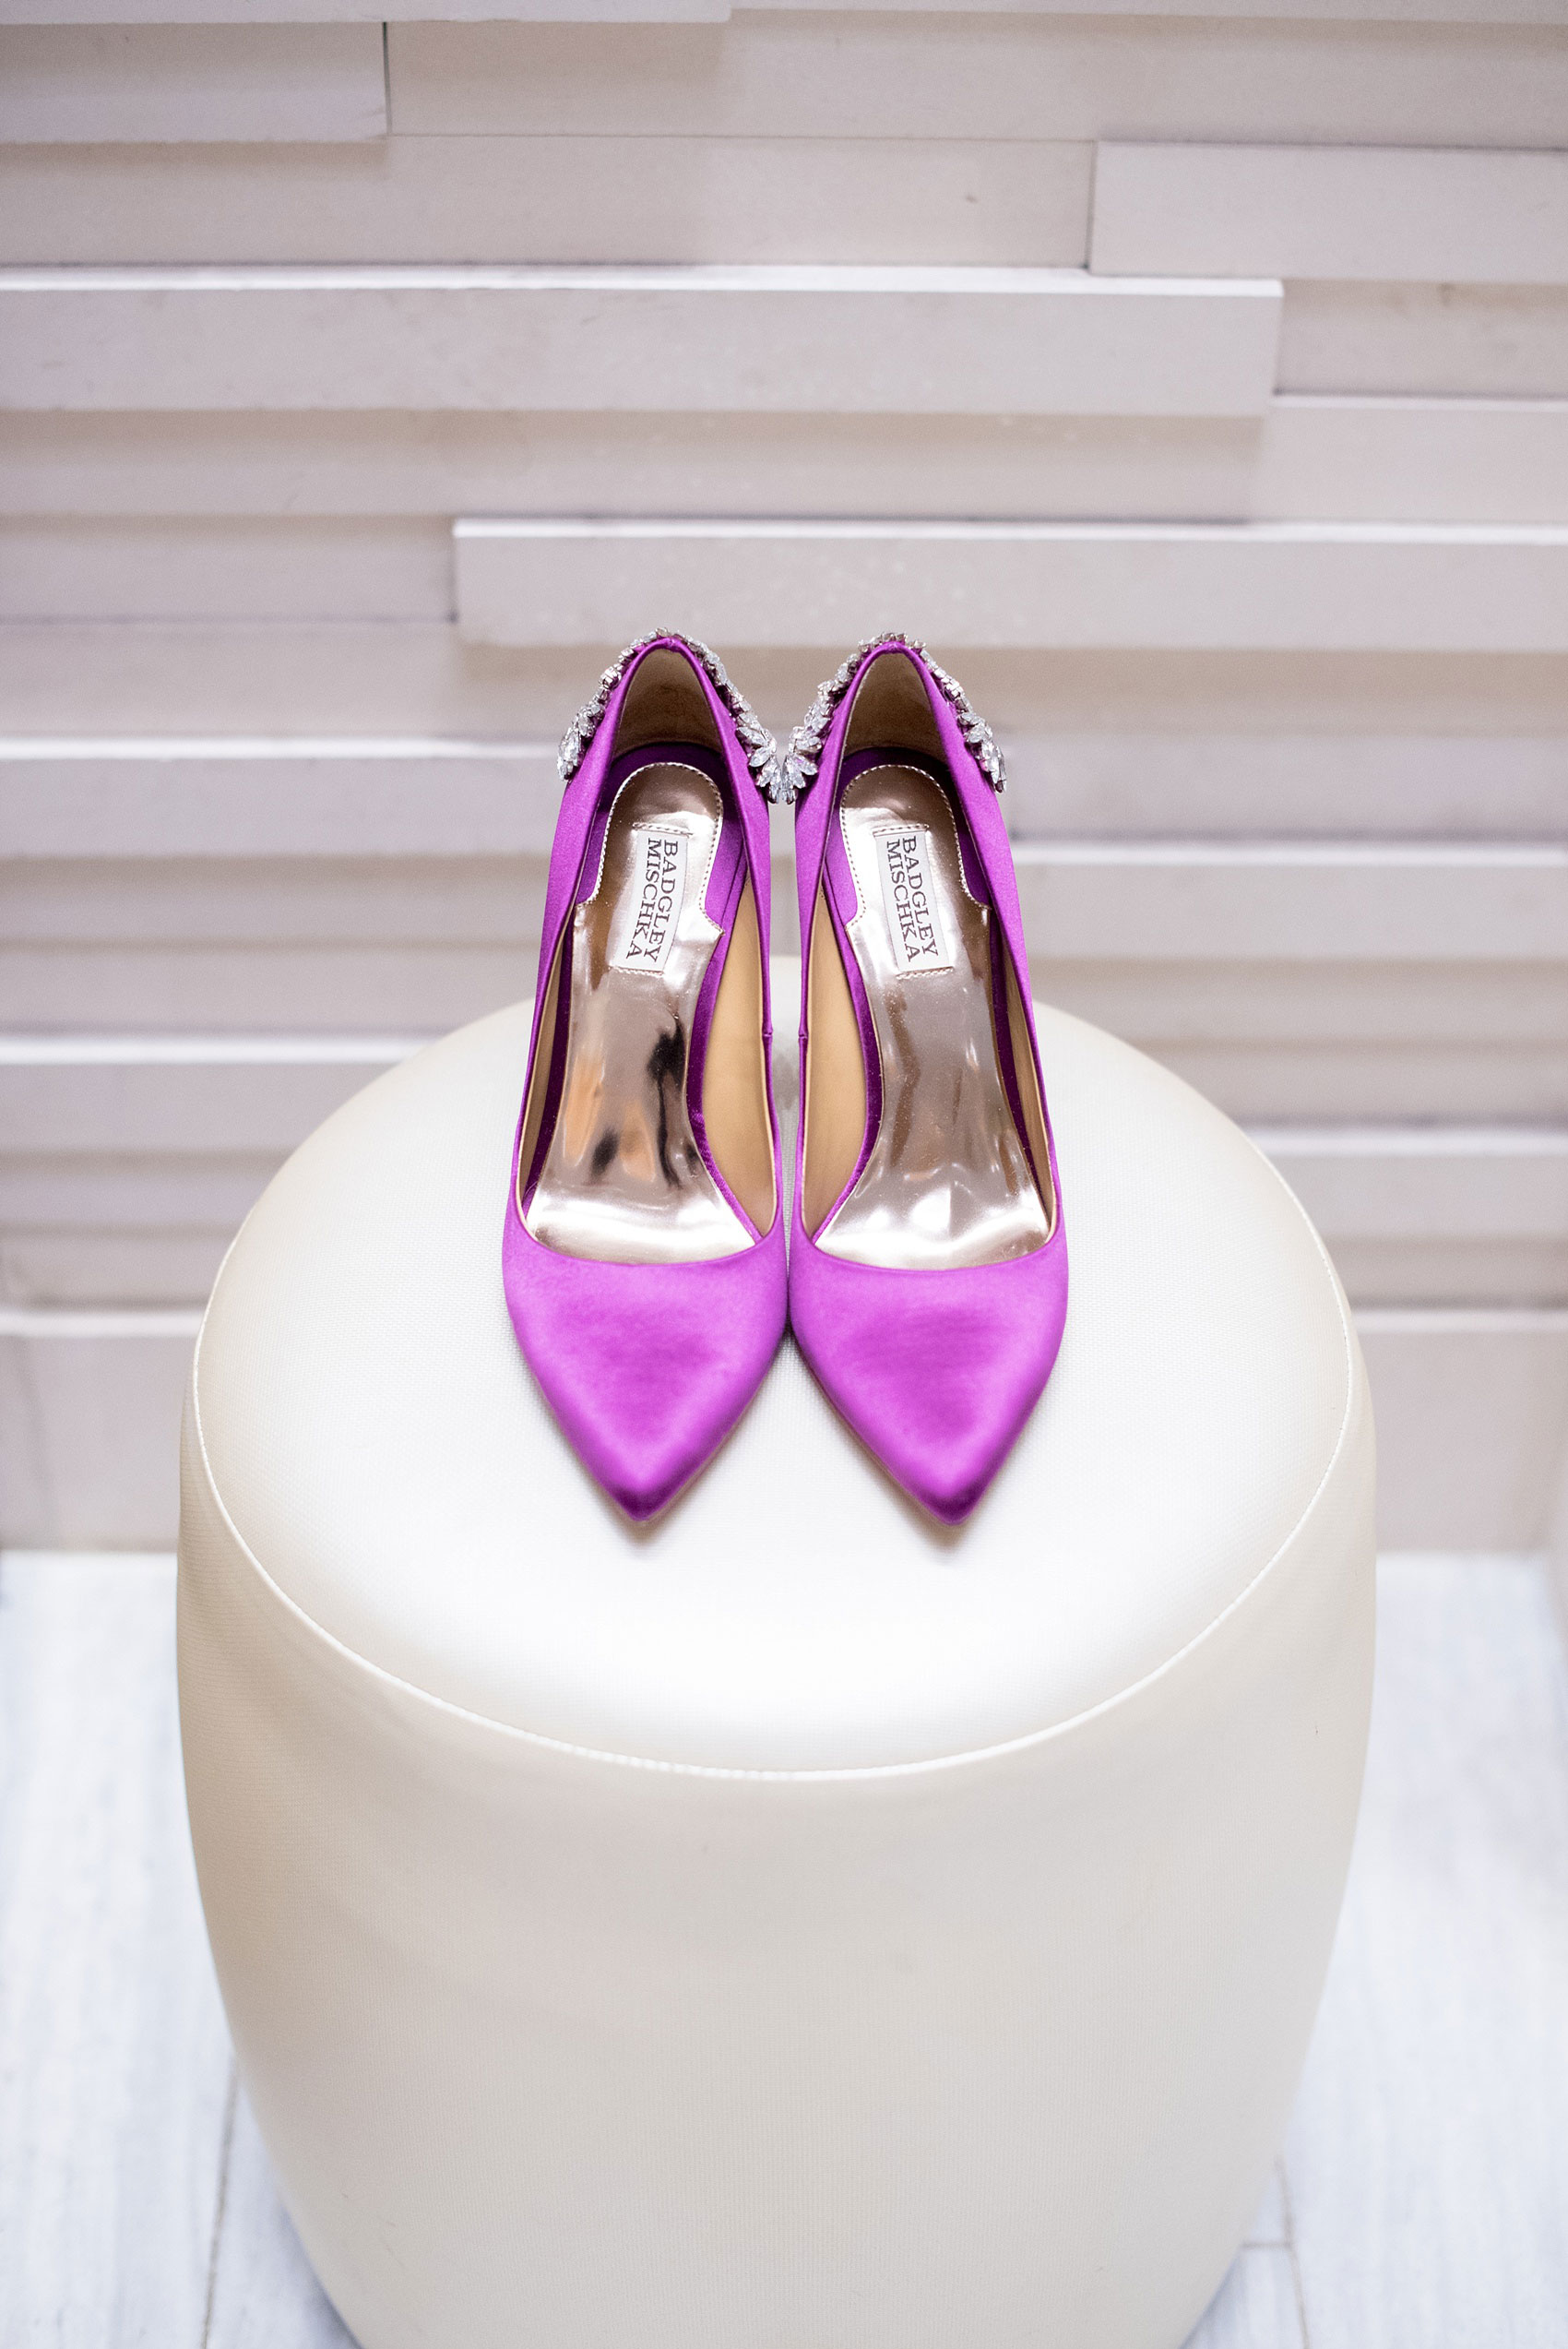 Mikkel Paige Photography photos of a NYC wedding at Tribeca Rooftop. The bride wore purple Badgley Mischka heels with jewels on them.